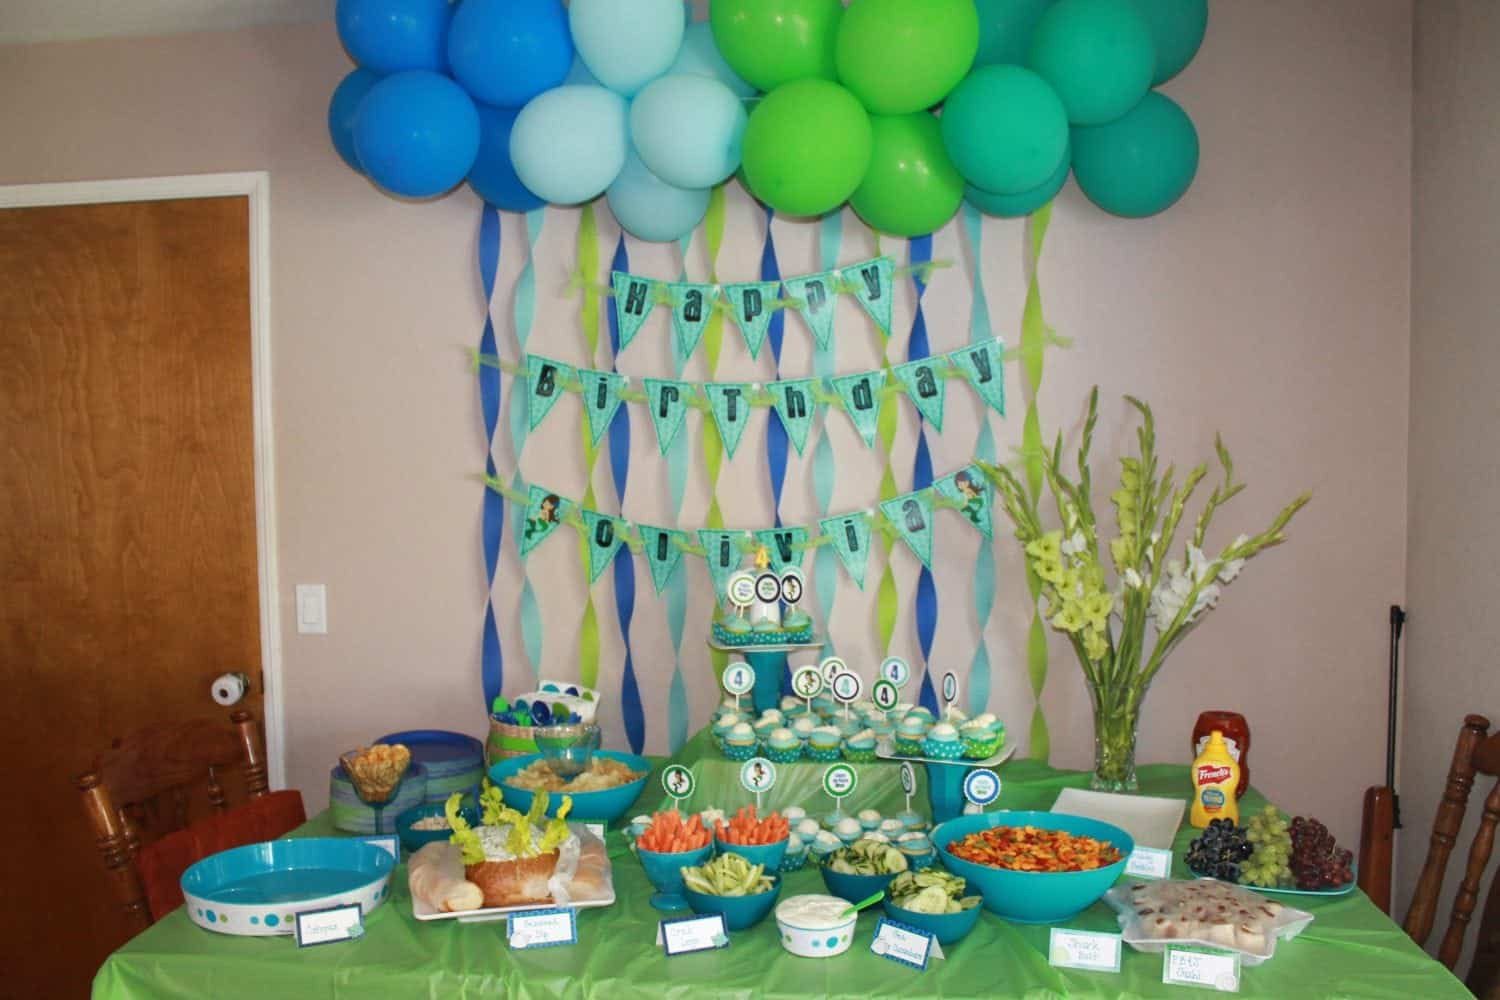 How To Decorate Birthday Party At Home
 How To Decorate For A Birthday Party At Home